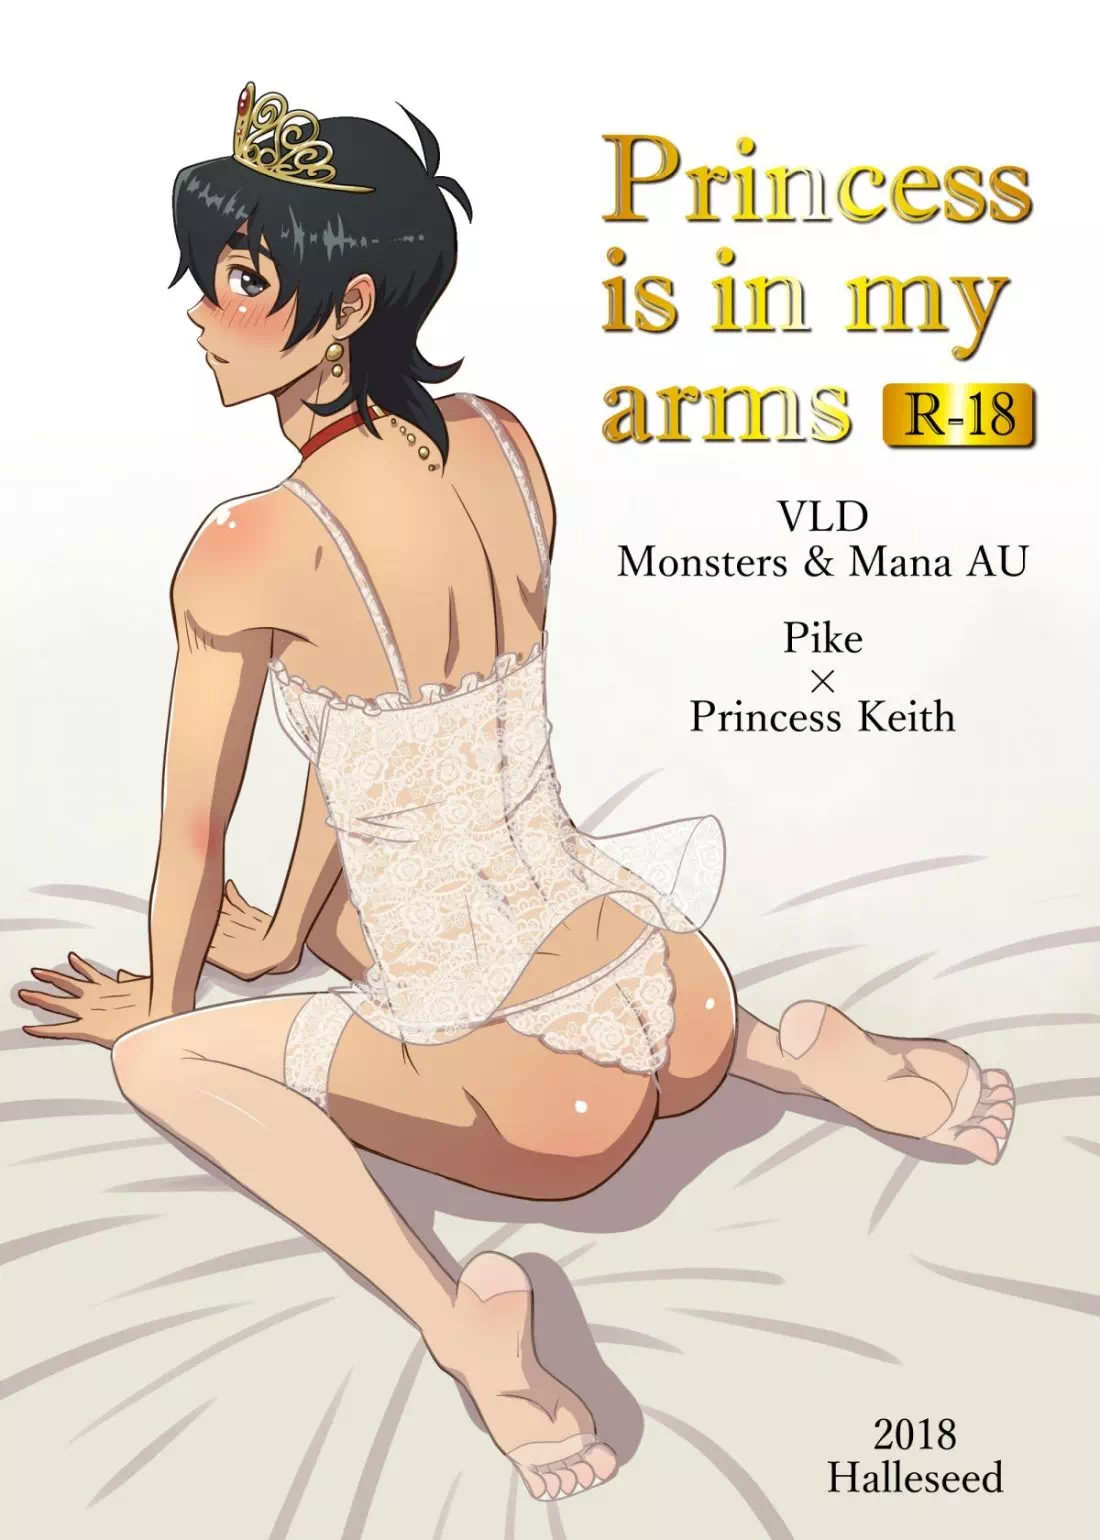 Yaoi porn comics Voltron: Legendary Defender – Princess is in my arms